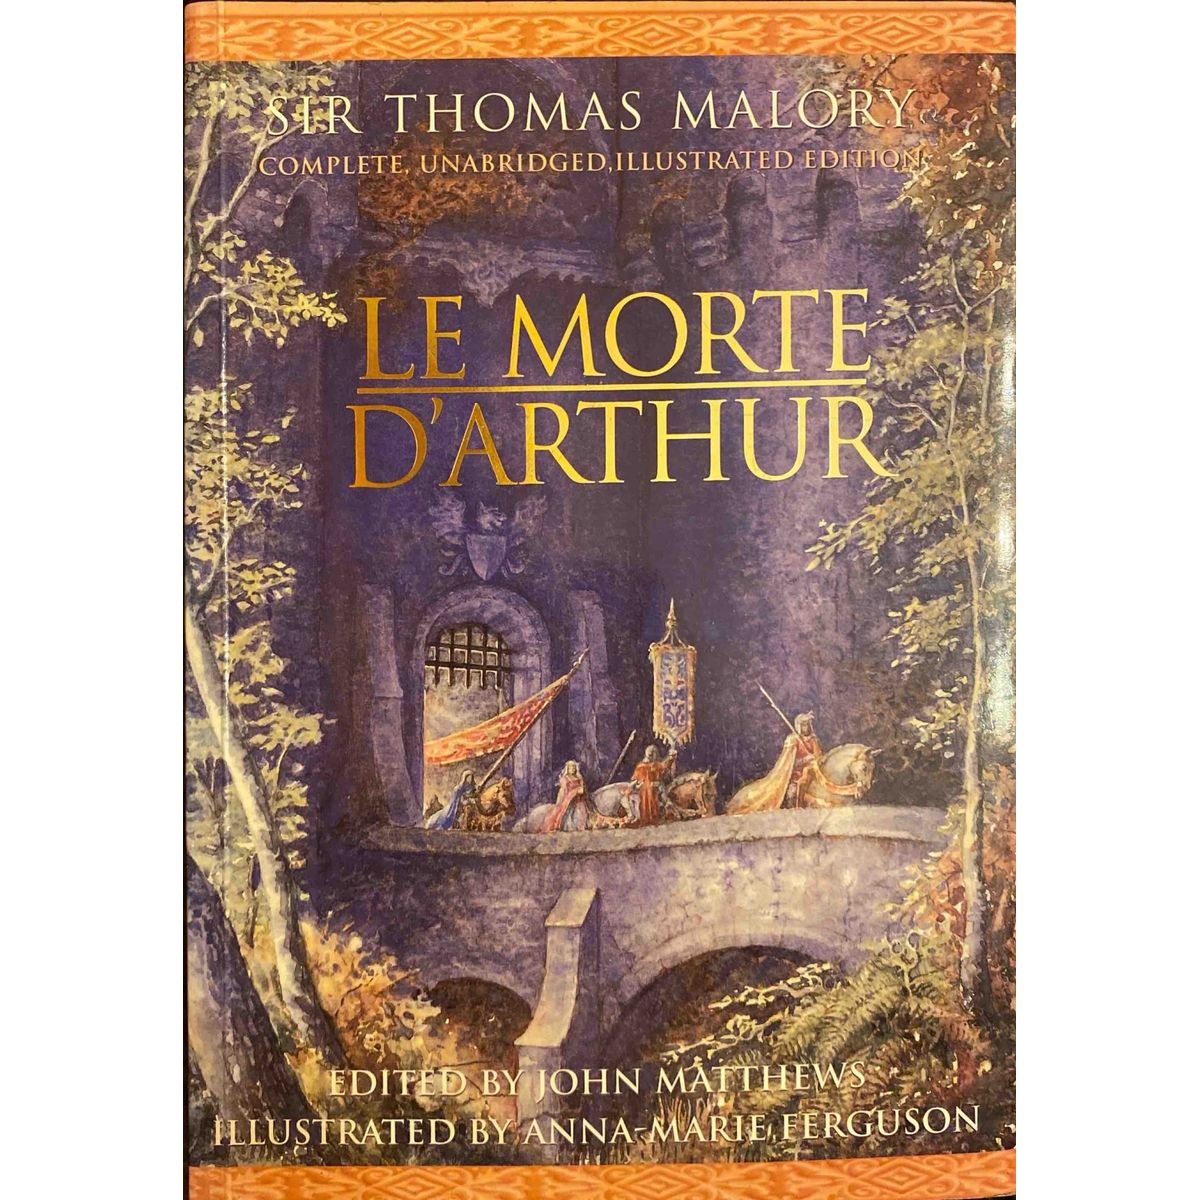 ISBN: 9781844030019 / 1844030016 - Le Morte D'Arthur: Complete, Unabridged, Illustrated Edition by Sir Thomas Malory [2003]